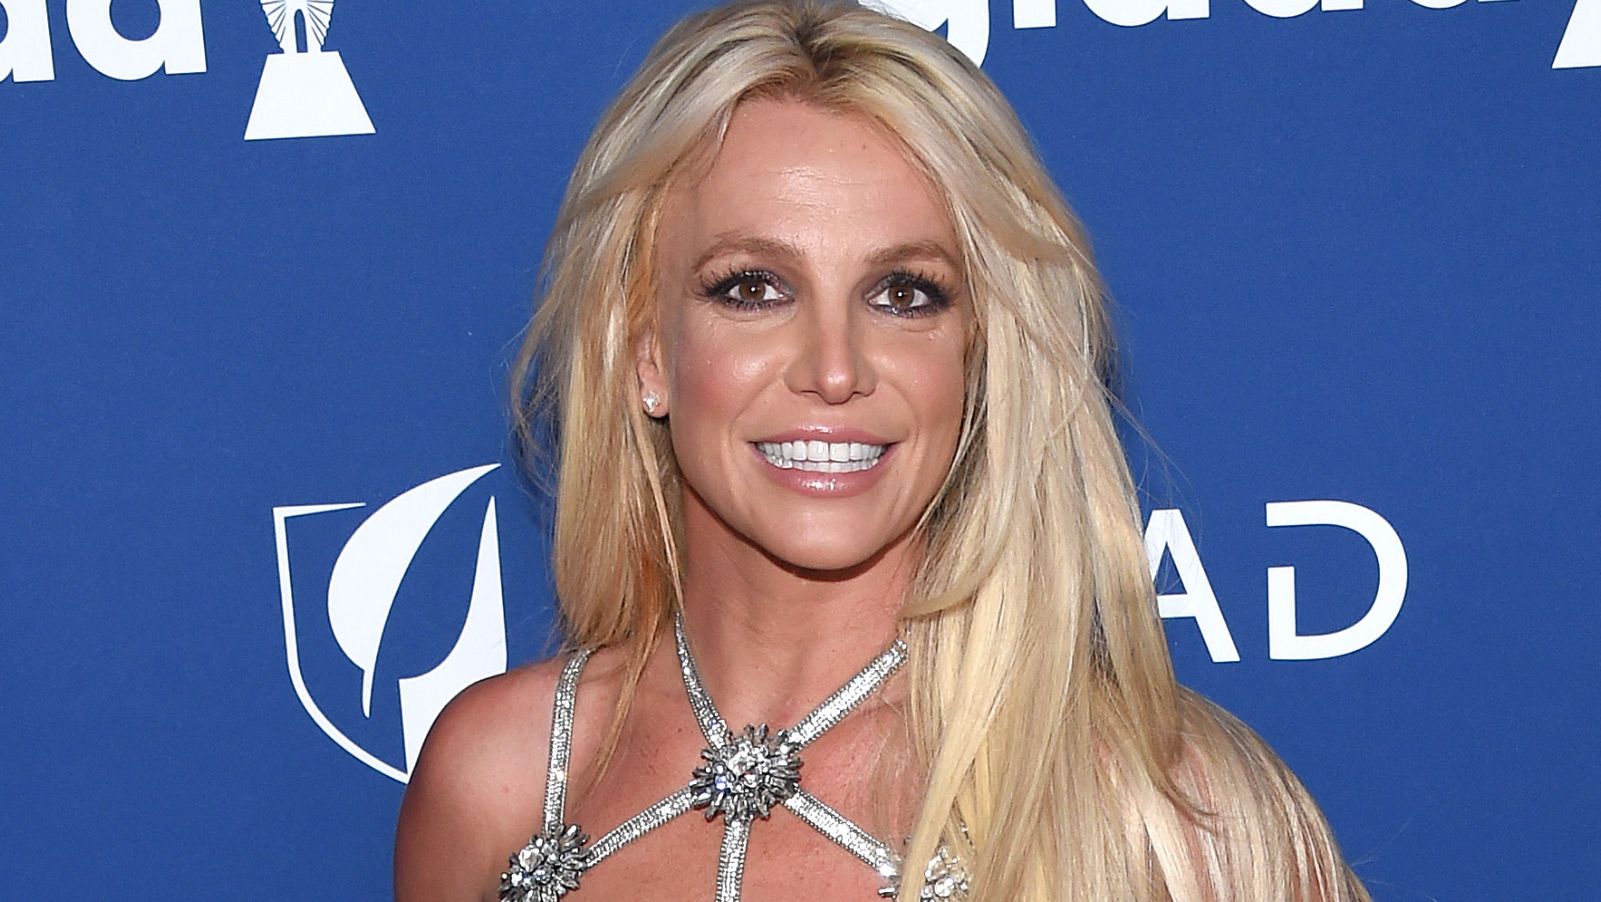 Britney Spears Spills Out Of Tiny White Bikini While Dancing At Home